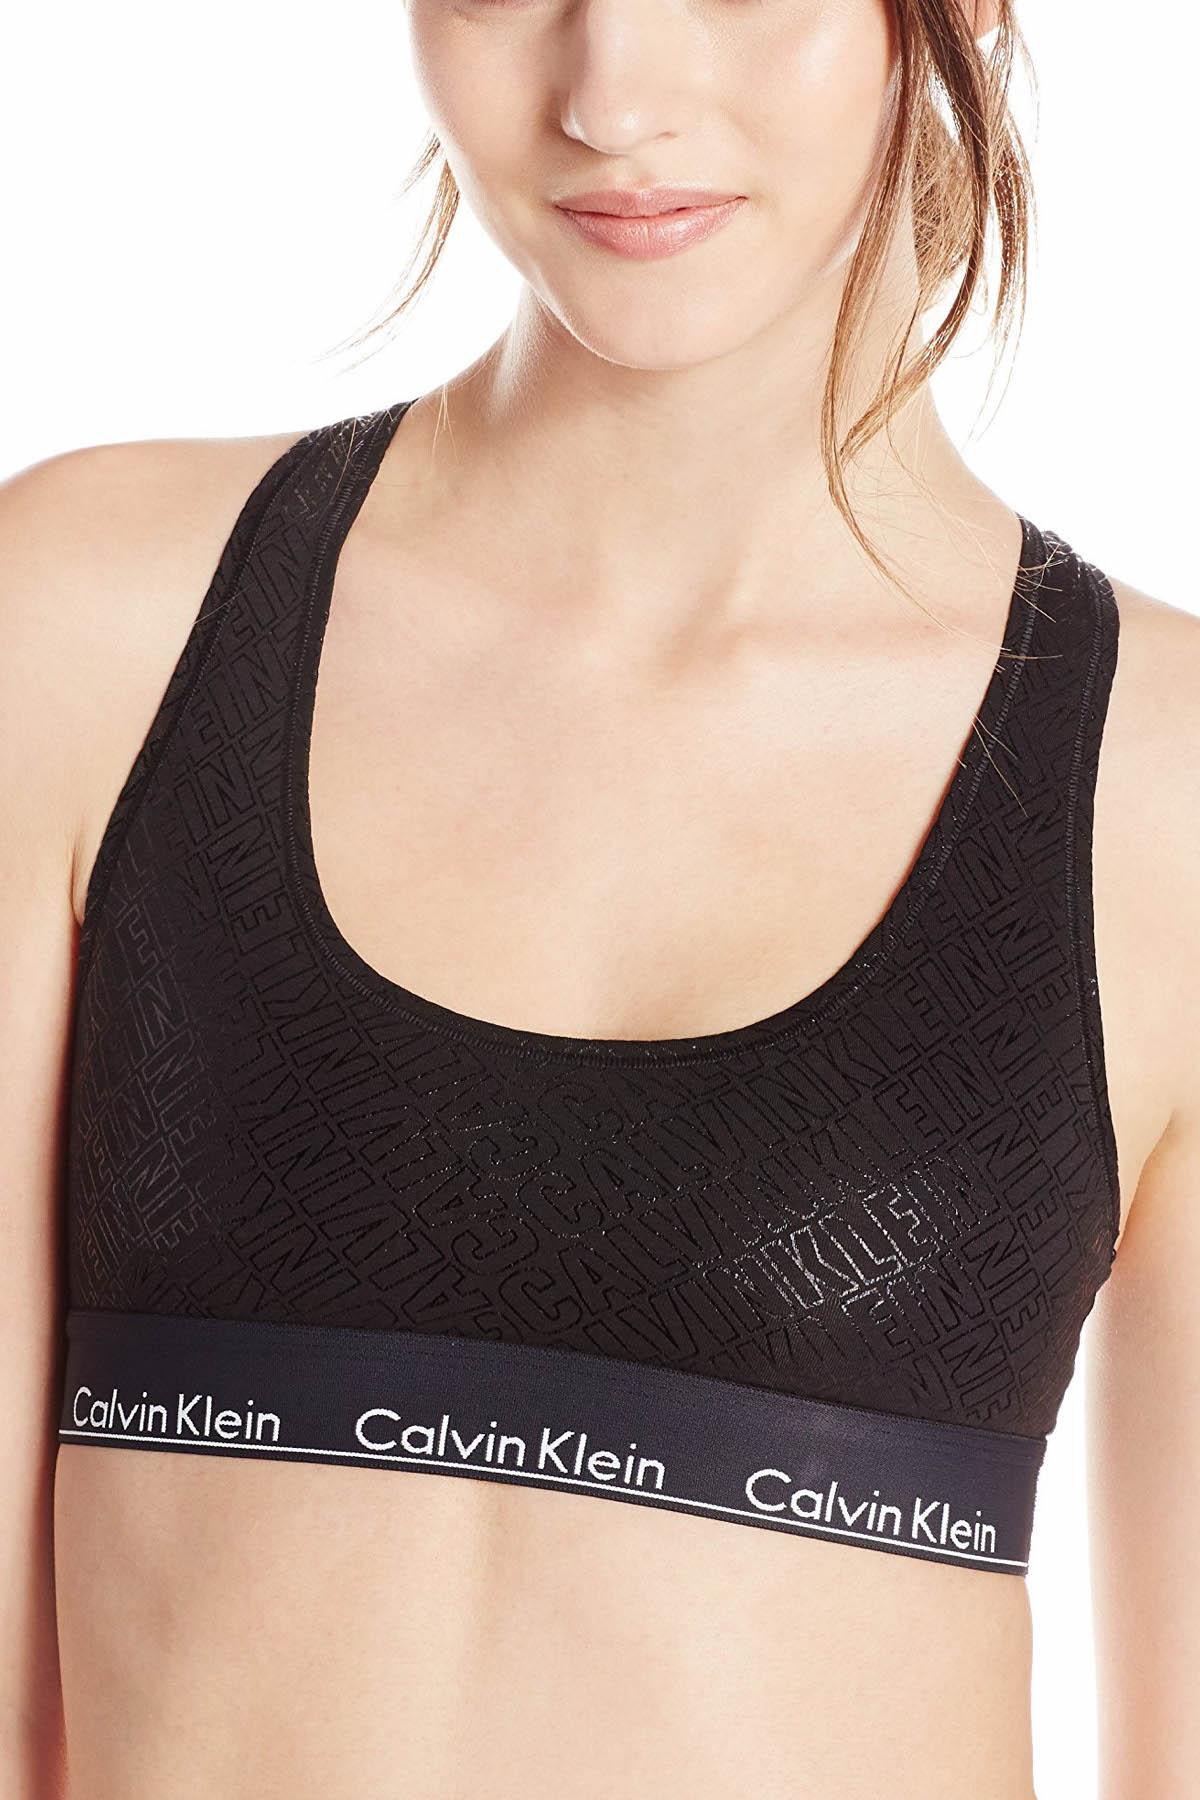 Calvin Klein NWT Small Black Logo Sports Bra - $22 New With Tags - From  Jenny